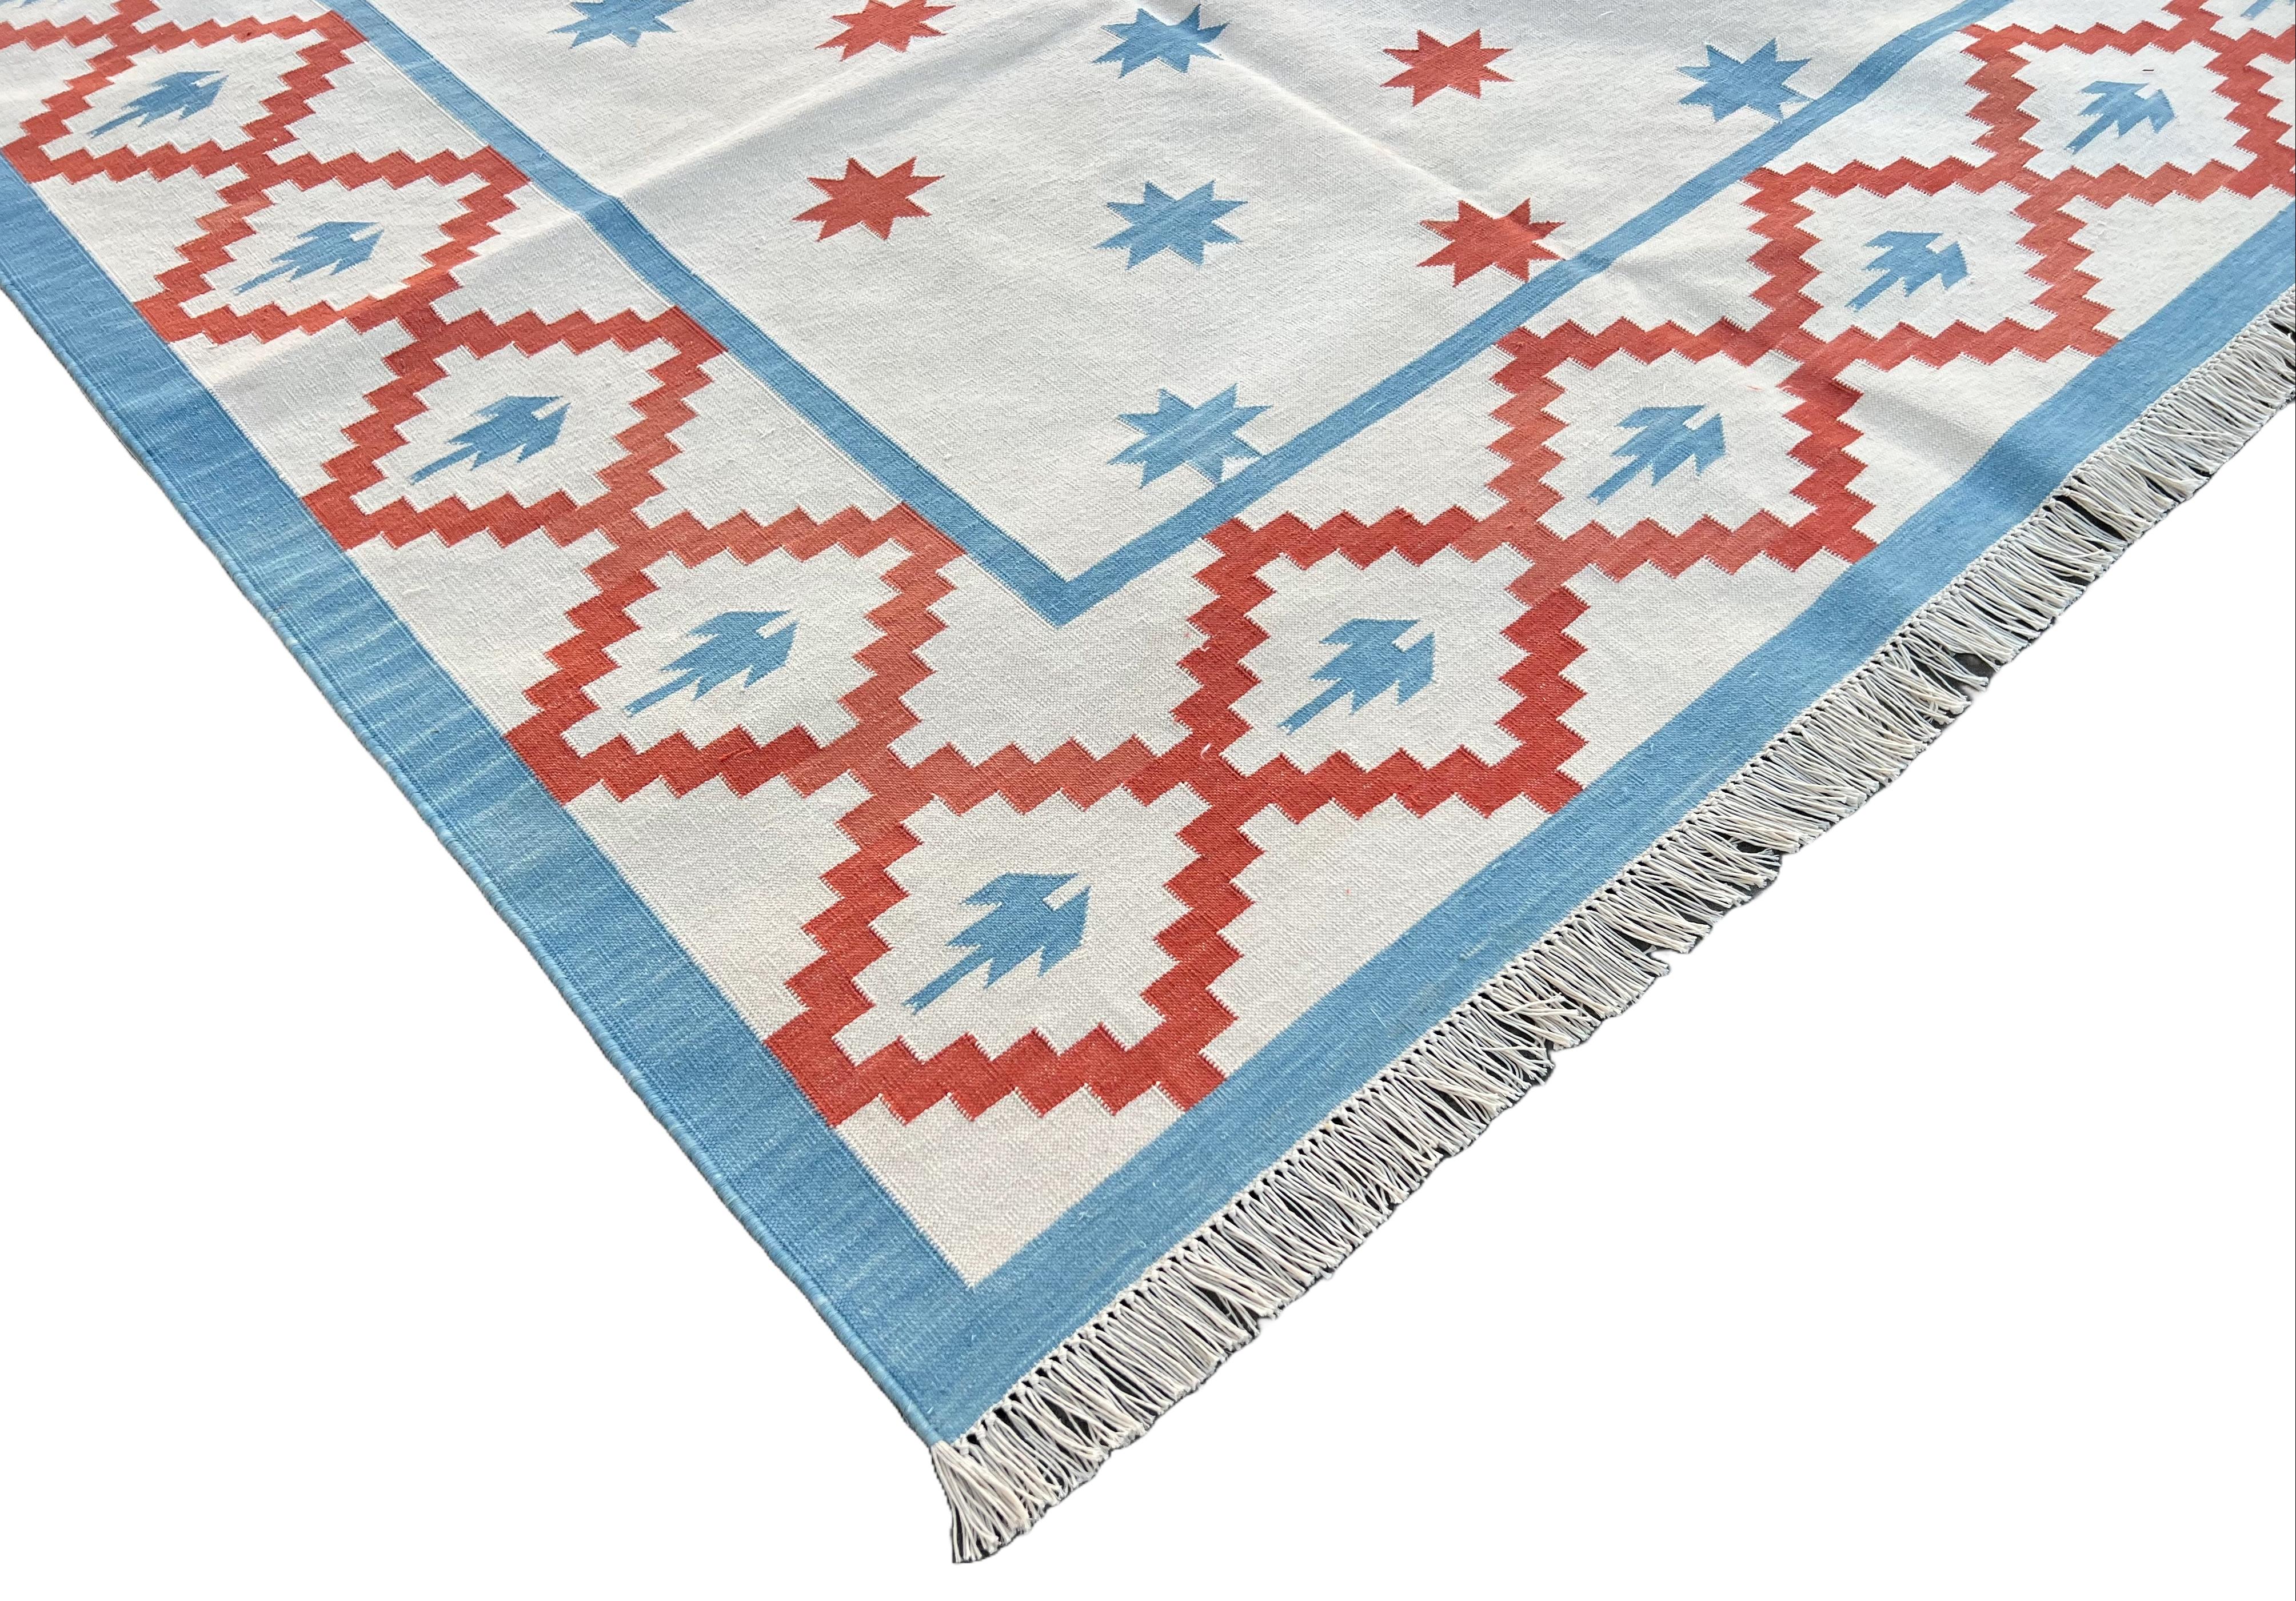 Mid-Century Modern Handmade Cotton Area Flat Weave Rug, Cream And Red Indian Star Geometric Dhurrie For Sale